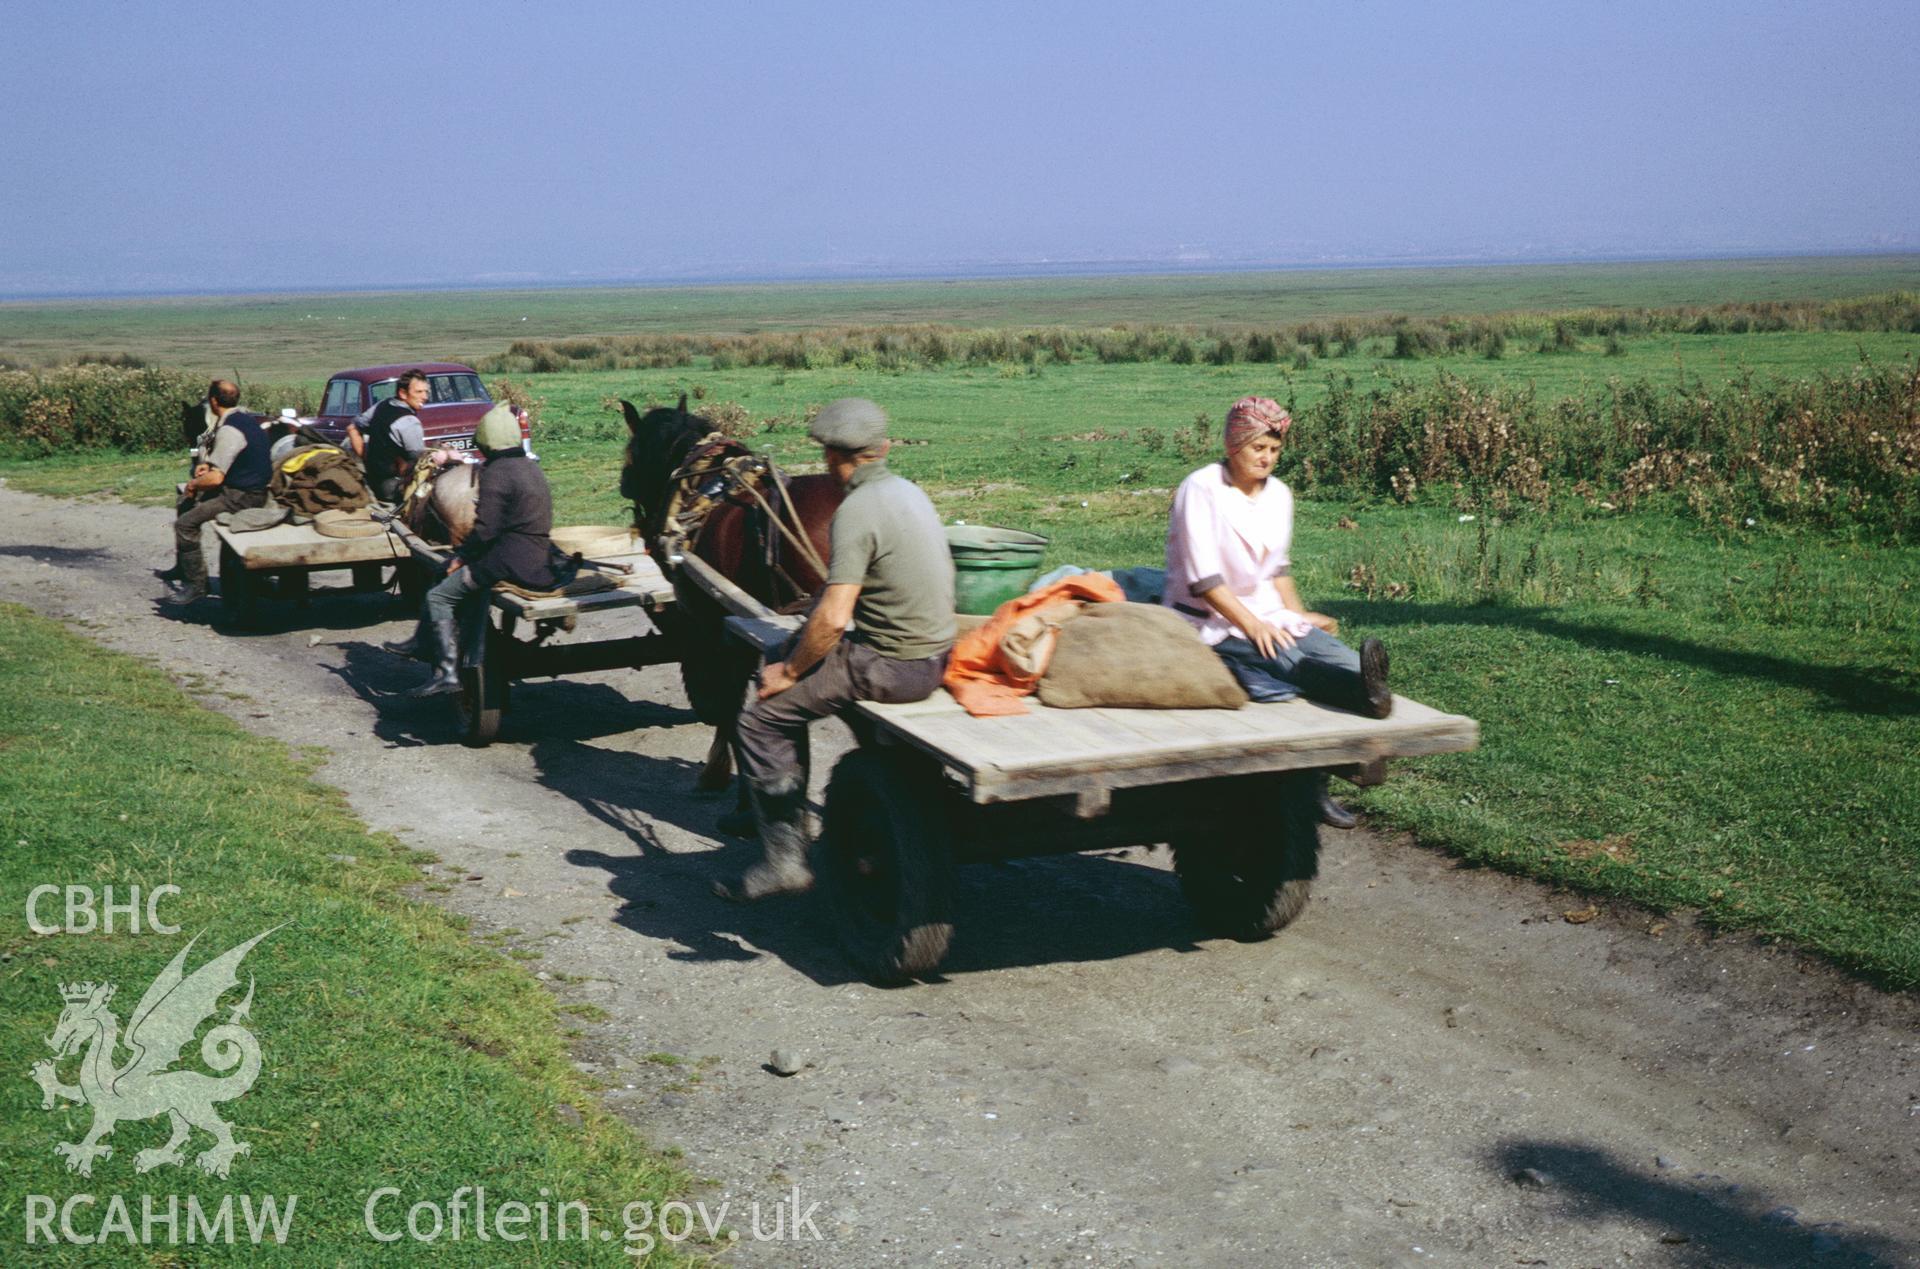 35mm colour slide showing cockle pickers at Penclawdd, Gower, Glamorgan,  by Dylan Roberts.